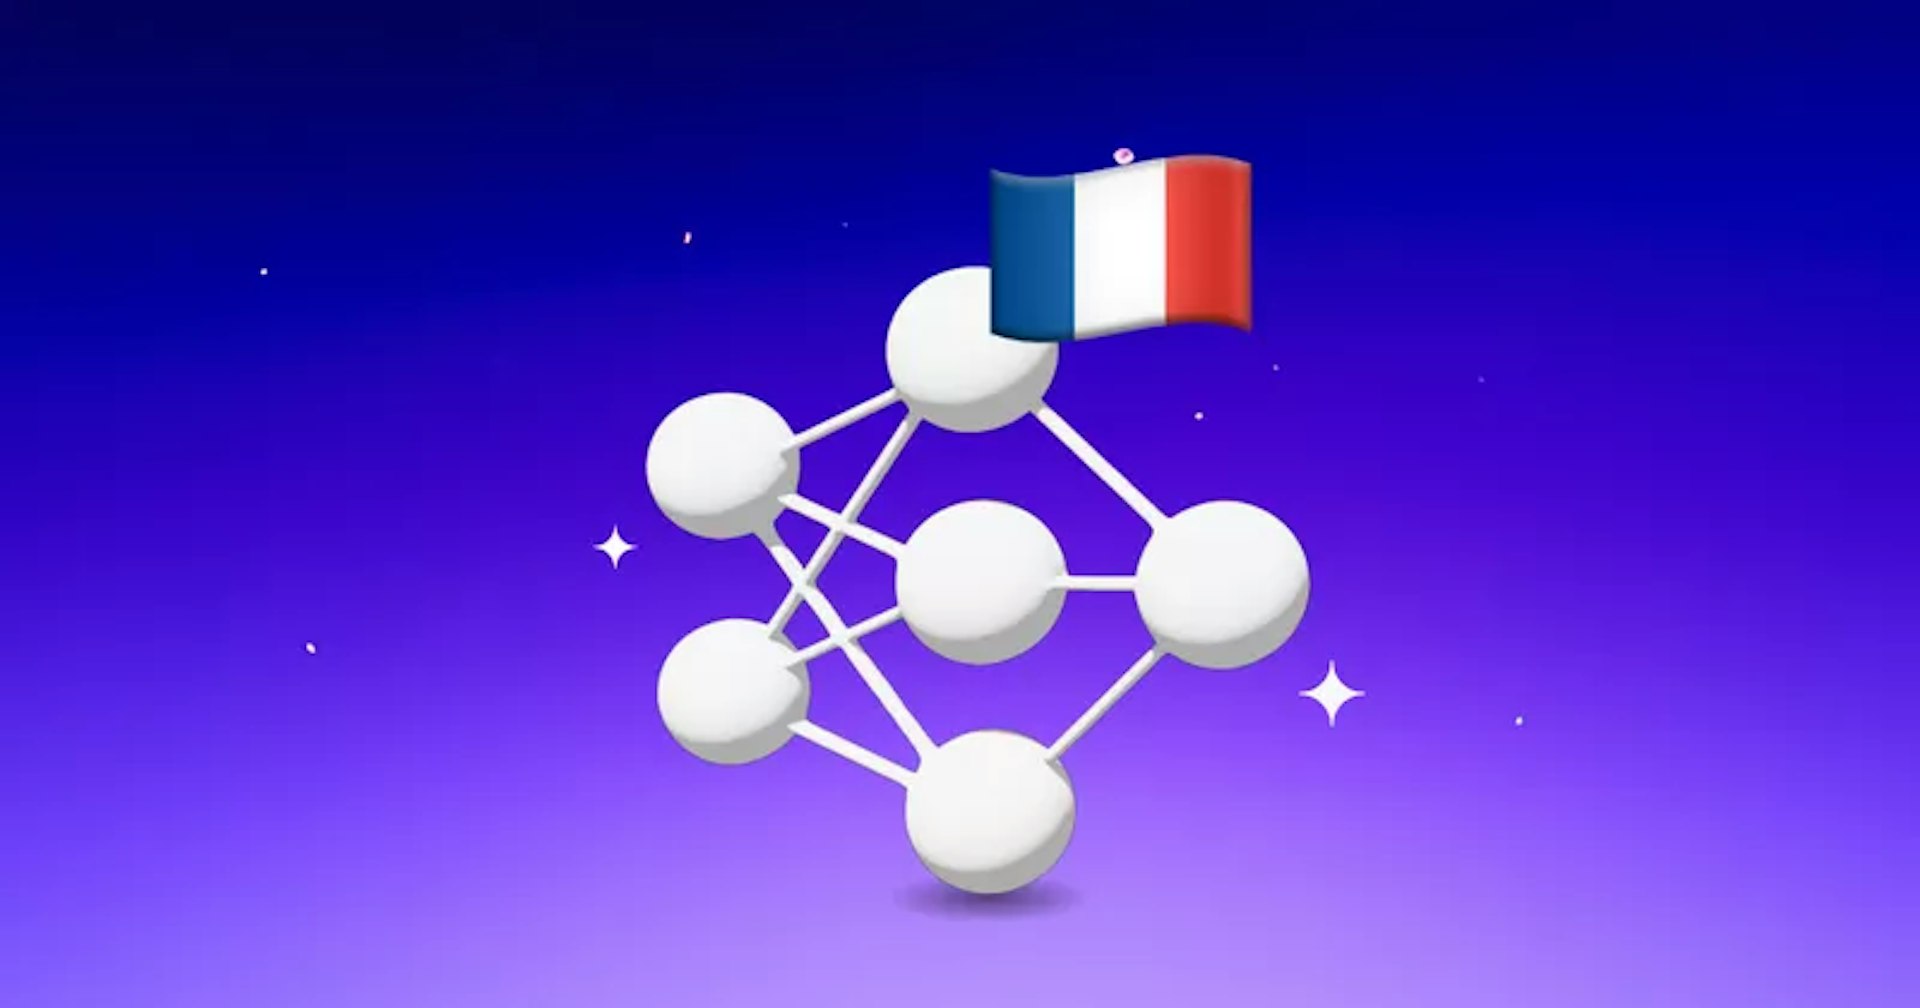  Bonjour! We’re Releasing an Enhanced French (beta) Speech-to-Text Language Model